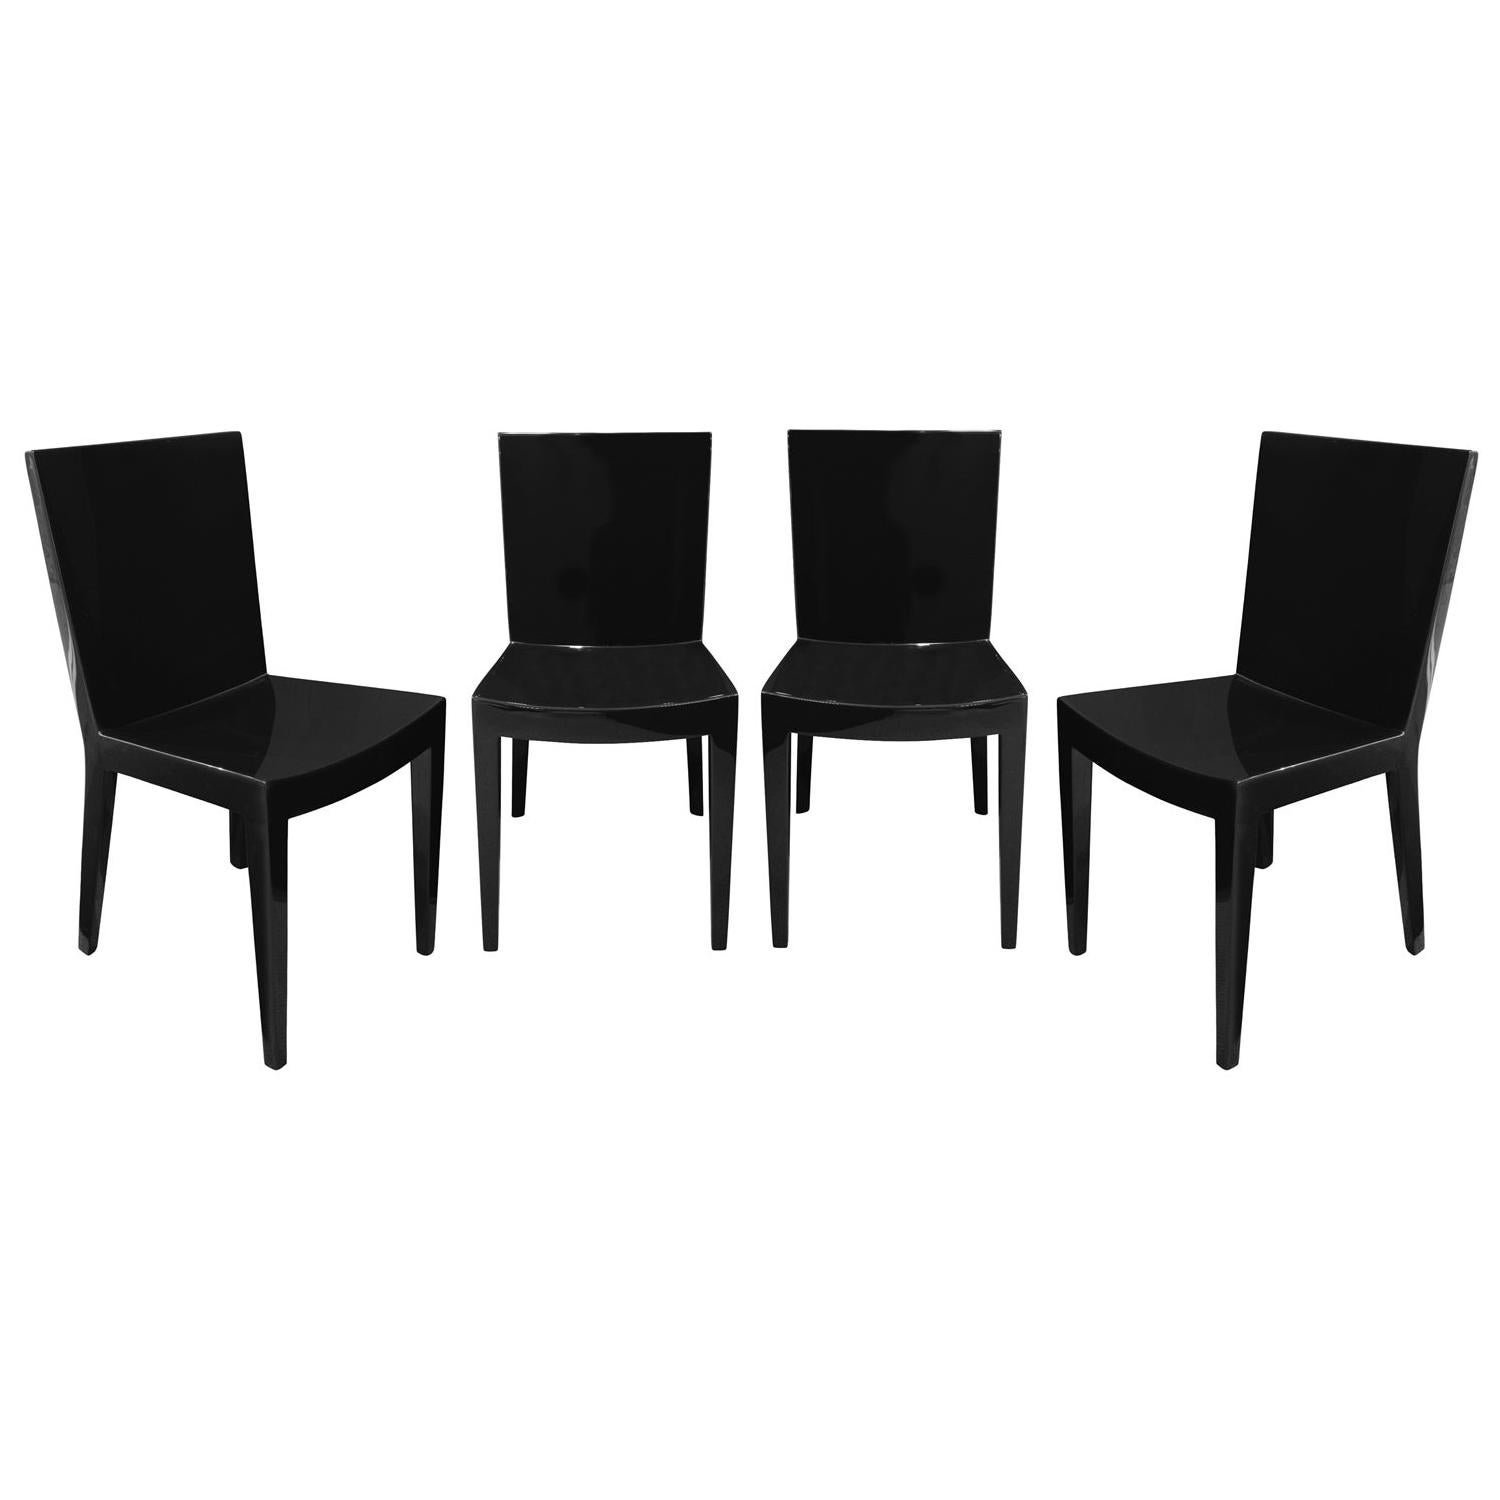 Karl Springer Set of 4 "JMF Chairs" in High Gloss Black Lacquer, 1980s